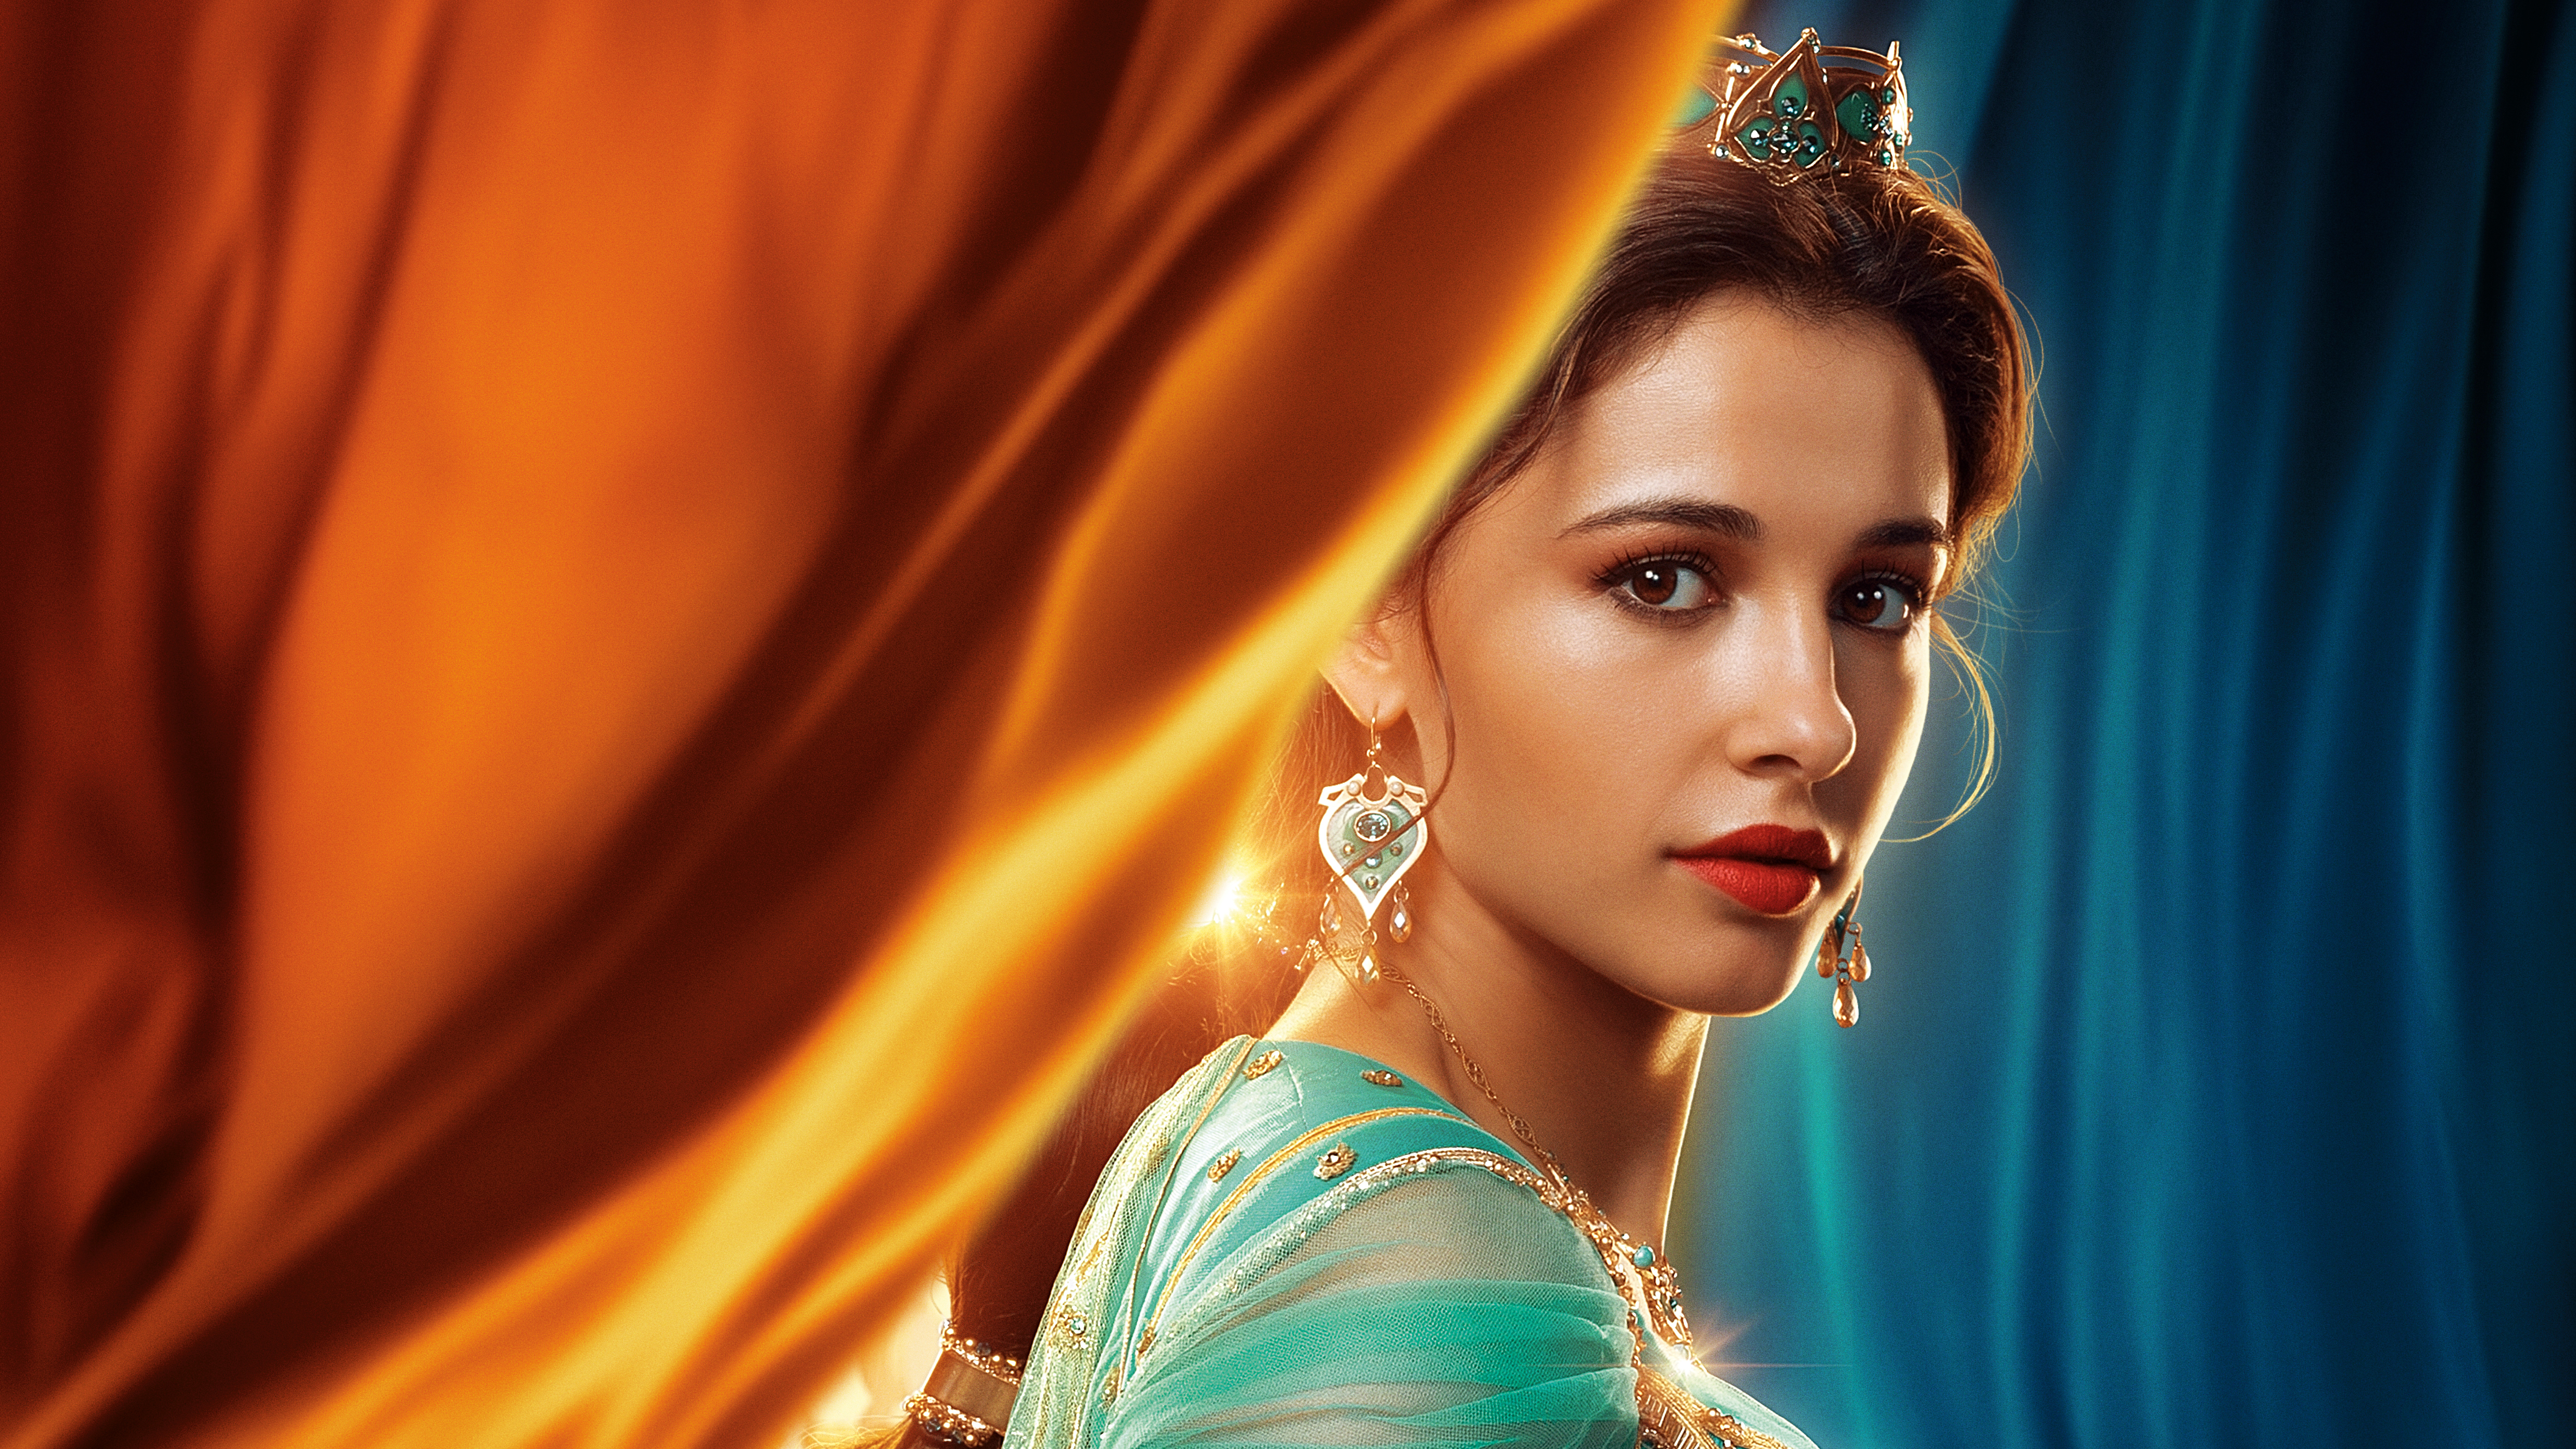 Princess Jasmine In Aladdin 2019 5k, HD Movies, 4k Wallpaper, Image, Background, Photo and Picture